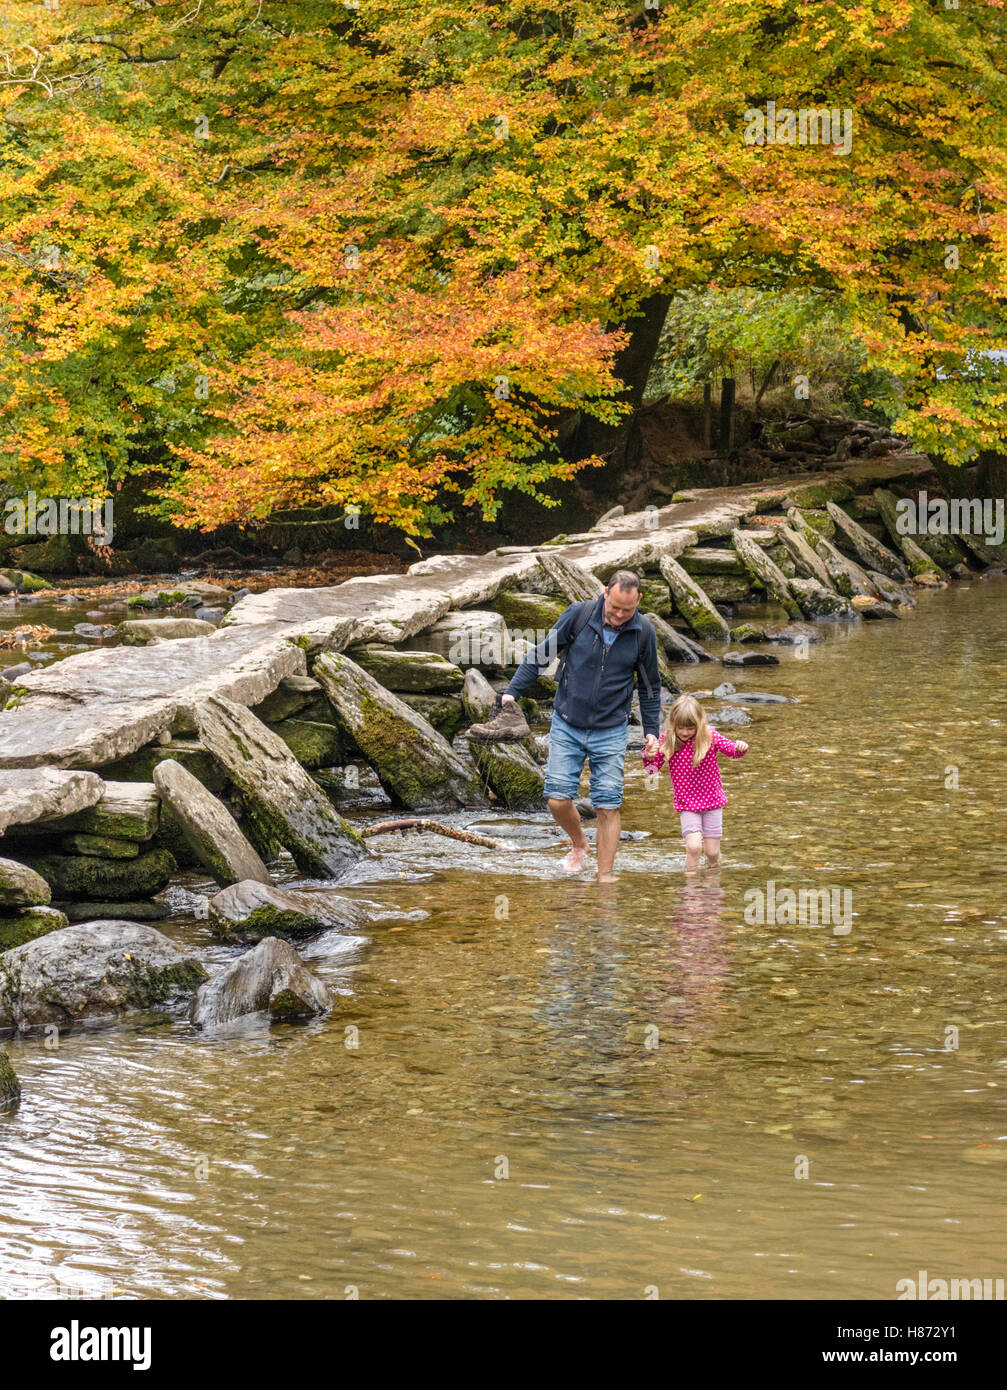 Autumn at Tarr Steps clapper bridge crossing the River Barle, Exmoor National Park, Somerset, England, UK Stock Photo